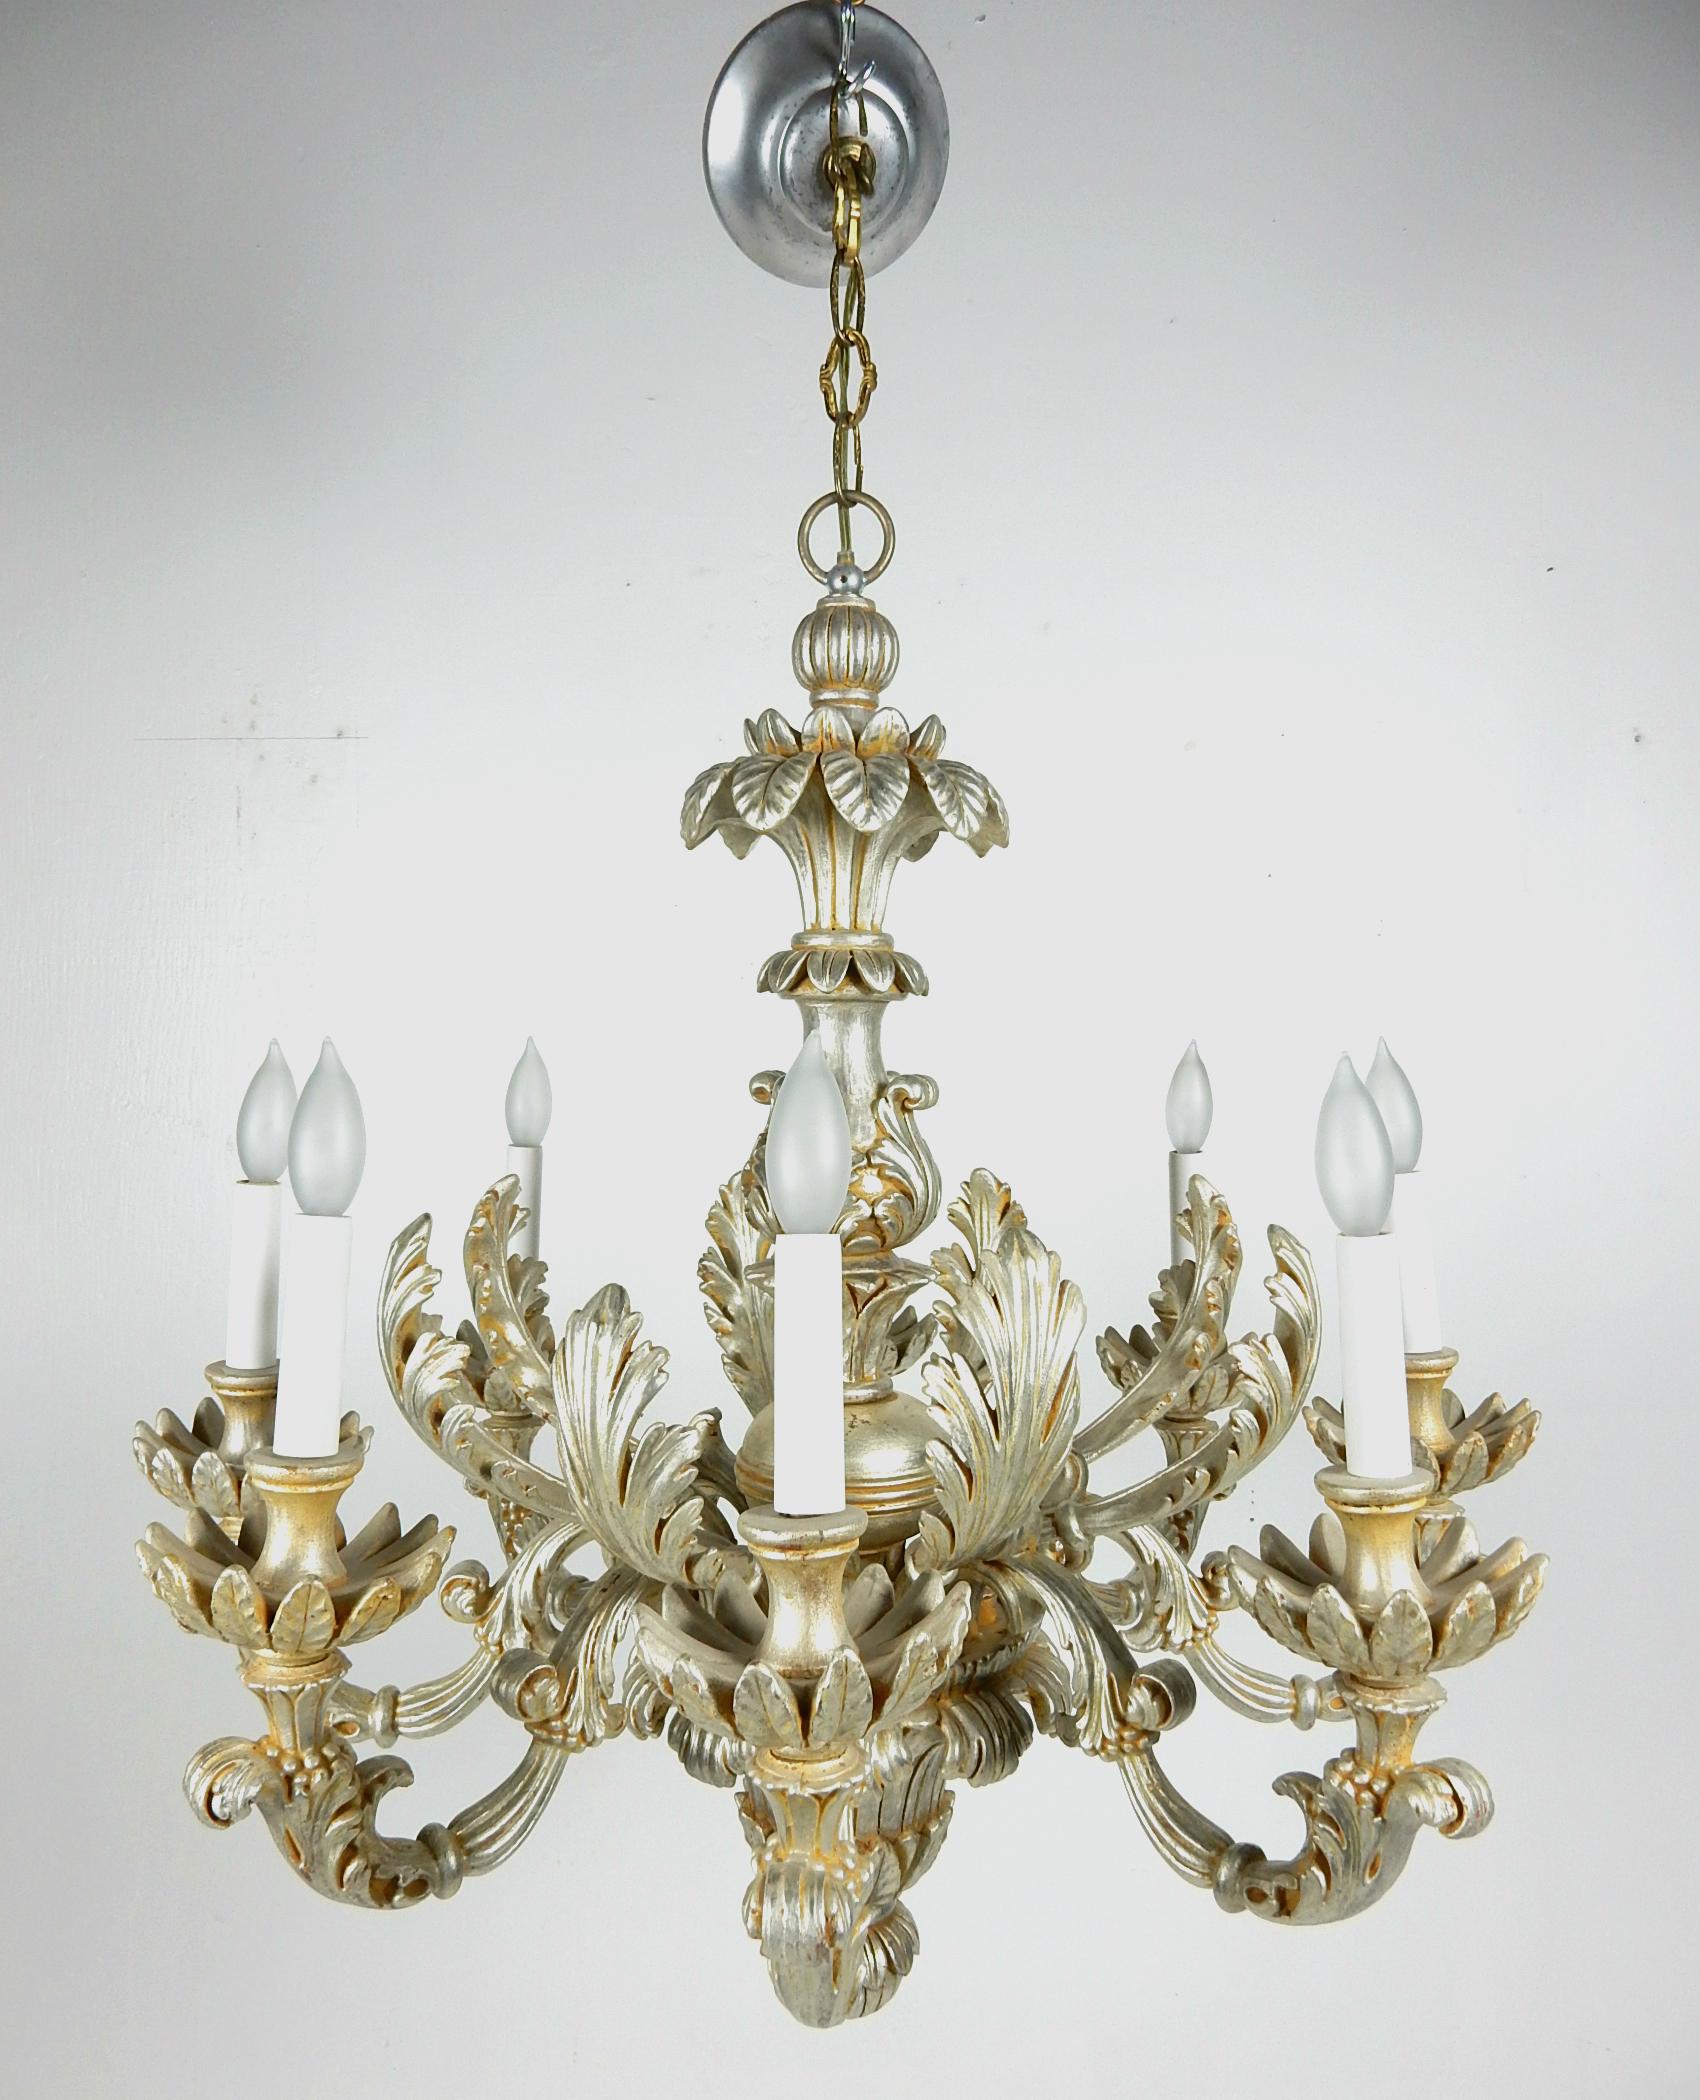 Gorgeous 1950s large Italian Baroque silverleaf chandelier.
8 candlestick bulb sockets. Measures 30 inch wide and 34 inch tip to tip of ceiling cap.
Excellent vintage condition with no broken or repaired parts. Ready to hang.